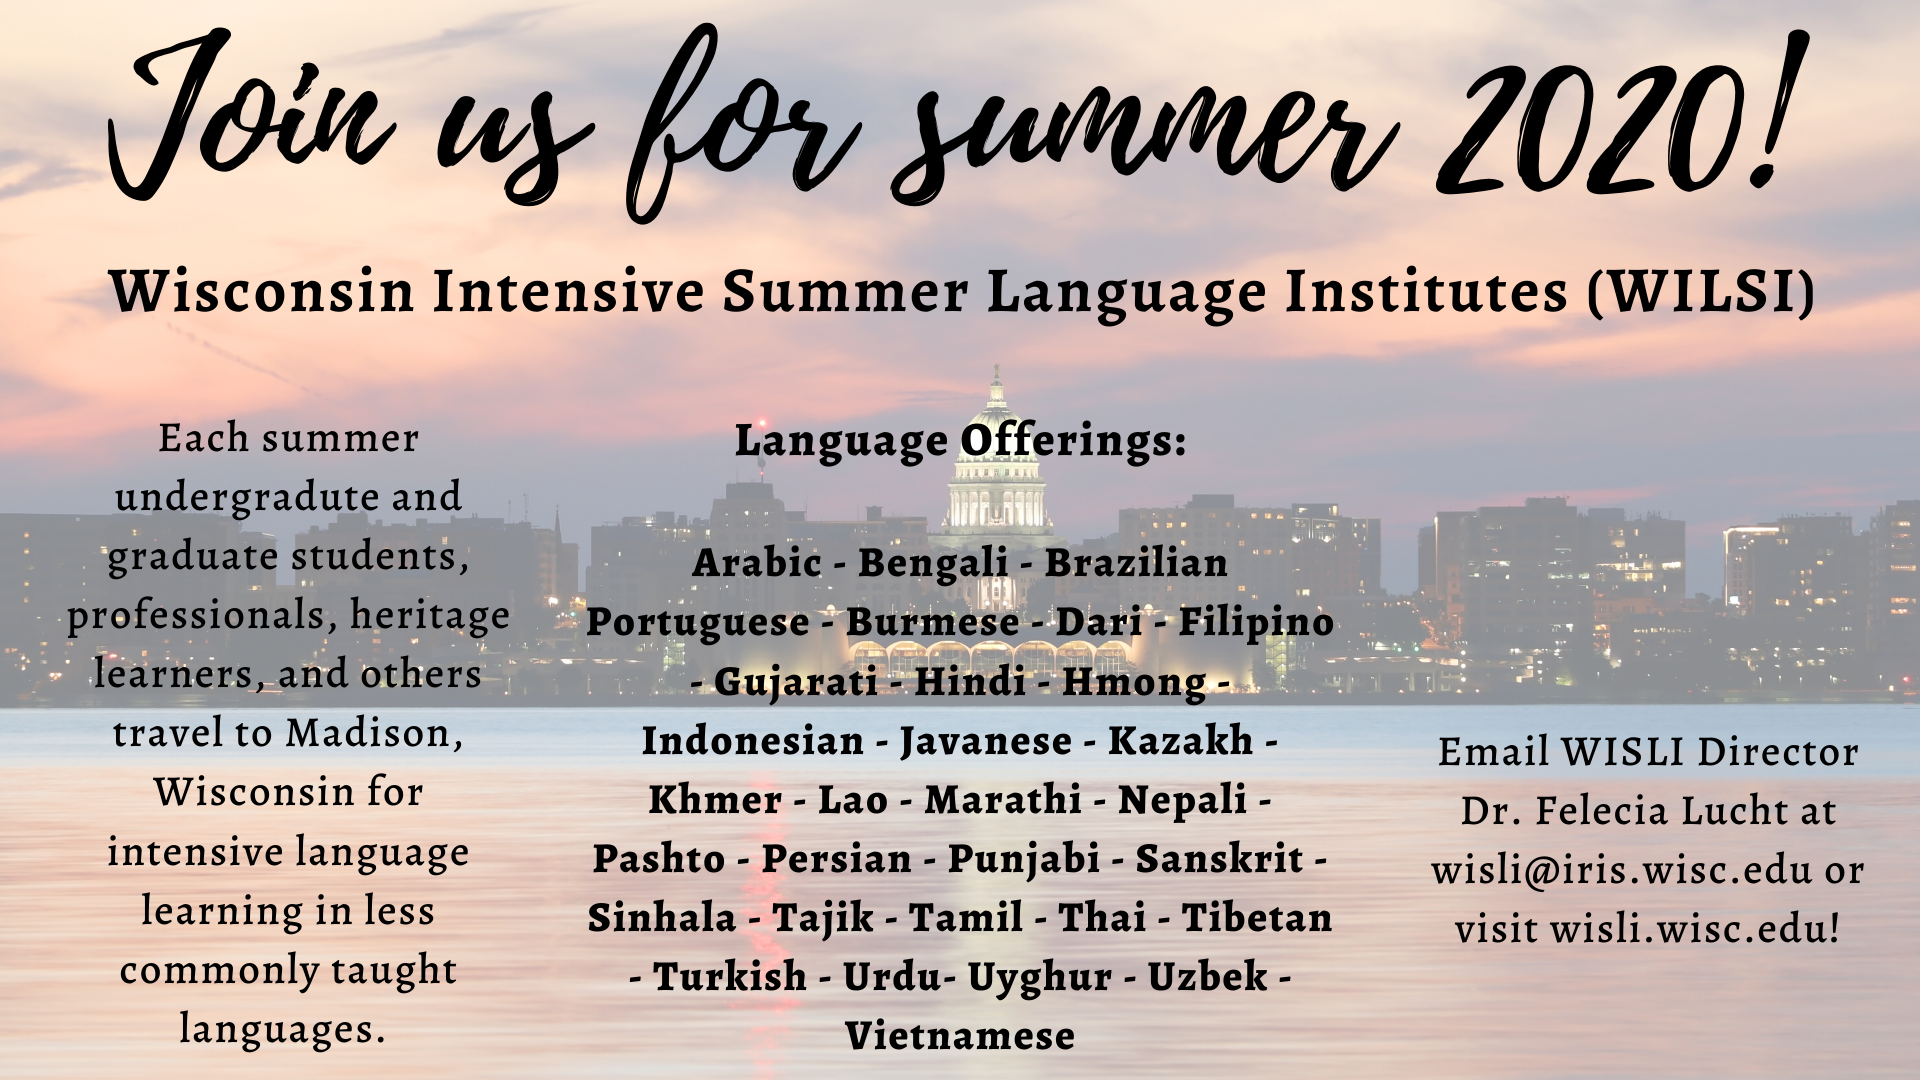 Join us for summer 2020! WISLI intensive language institutes